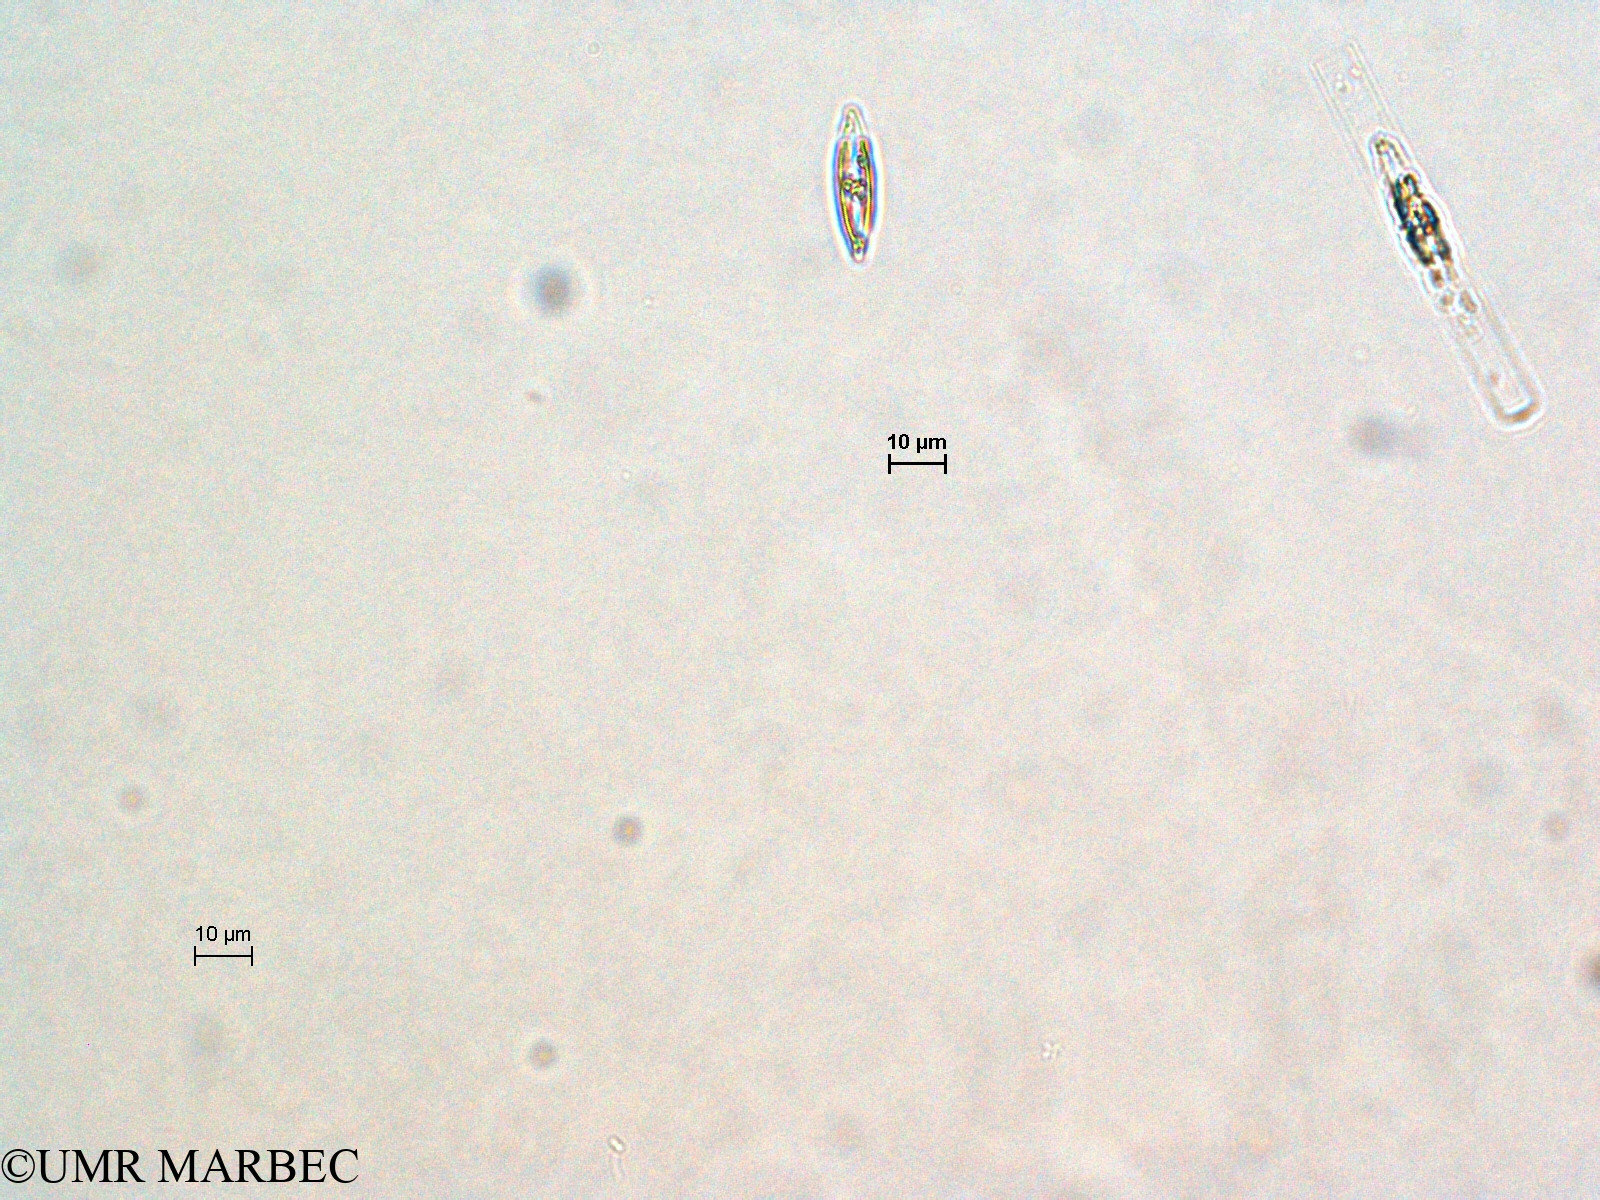 phyto/Scattered_Islands/all/COMMA April 2011/Navicula sp2(copy).jpg